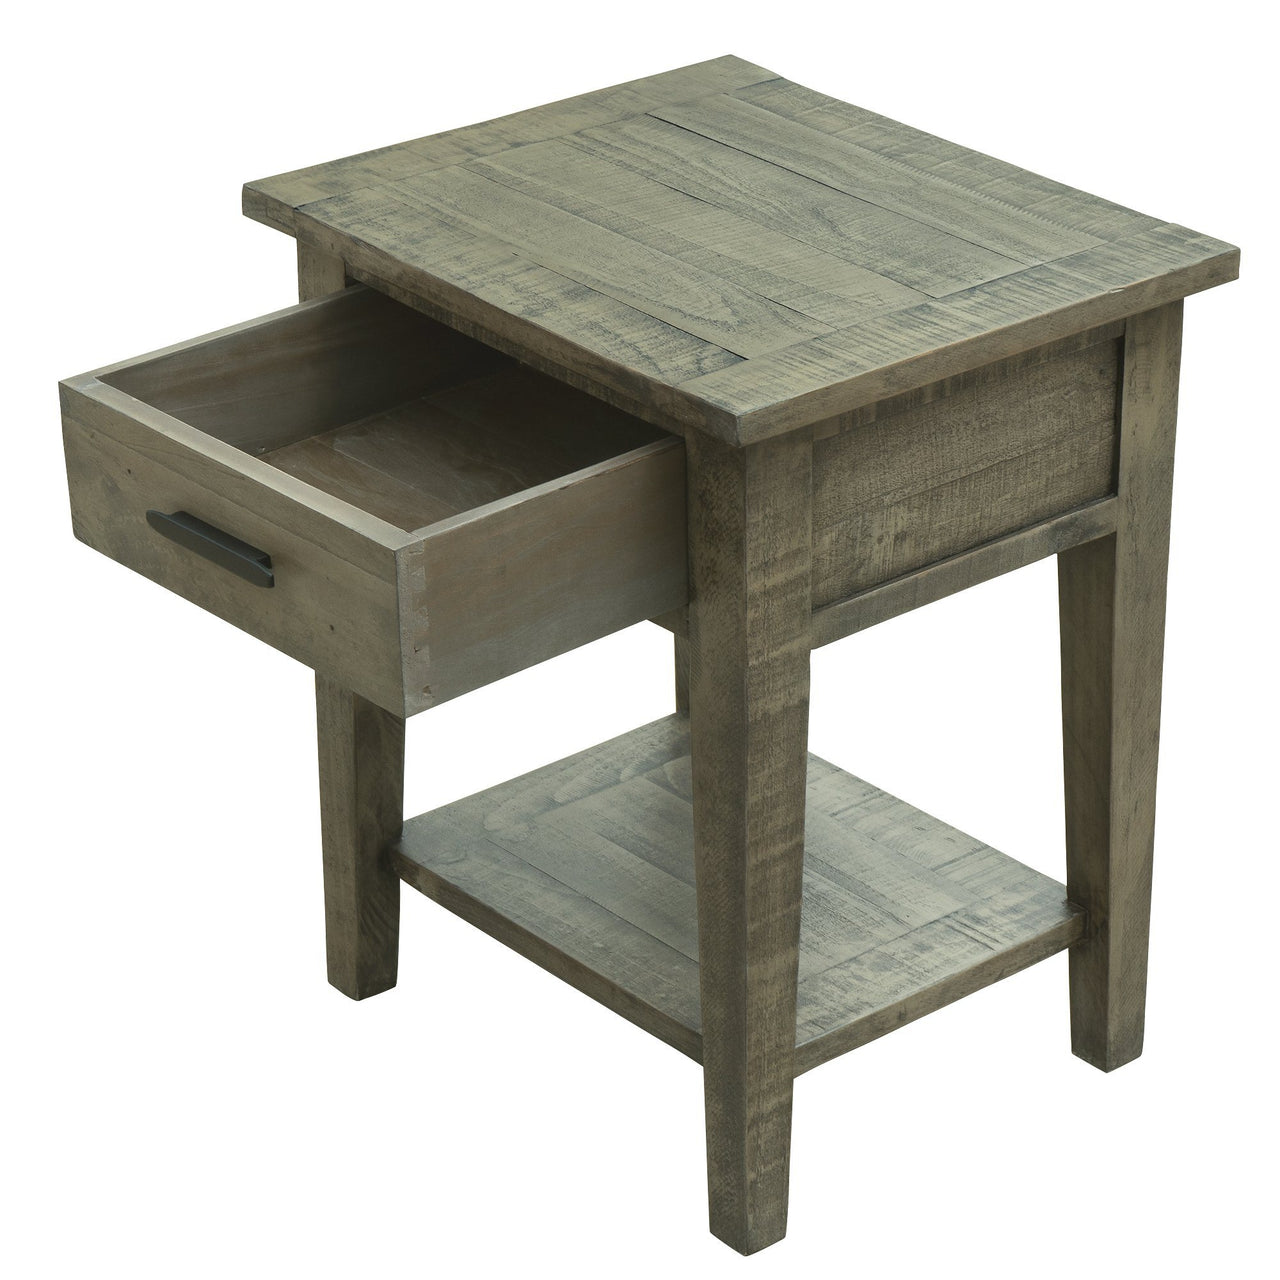 Ashford 20" Reclaimed Wood Lamp Table with Storage Shelf and One Drawer End Table AndMakers 